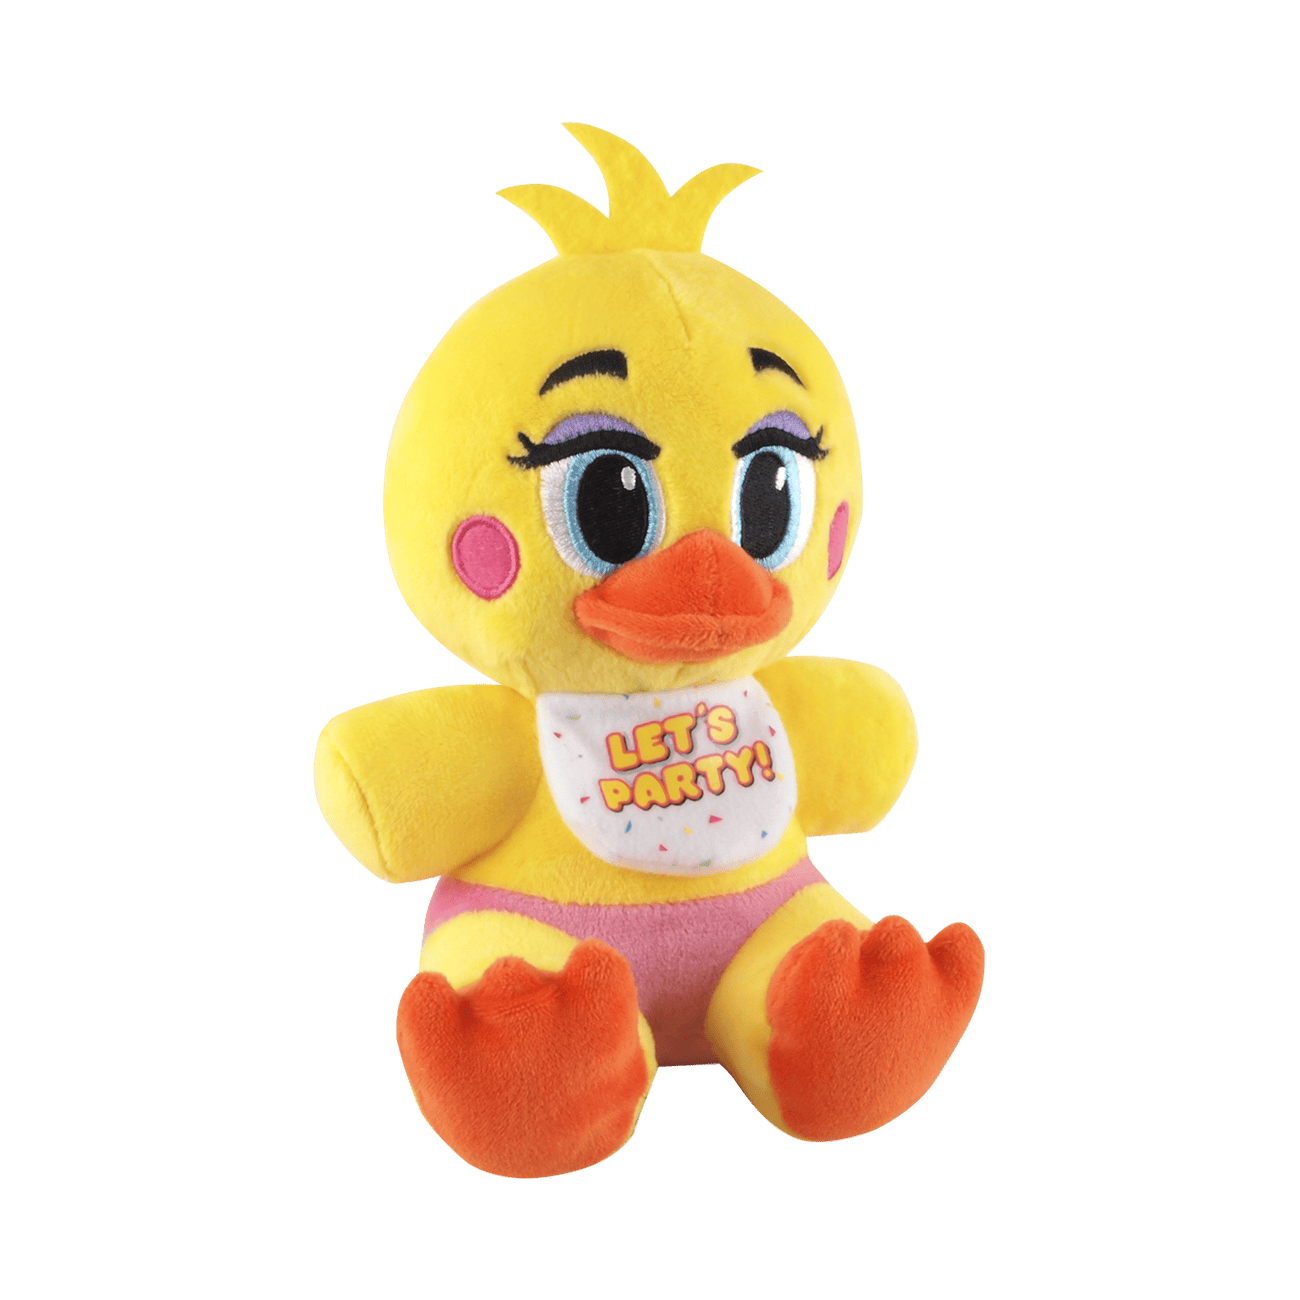 Plush Toy - Five Nights at Freddys - Chica - Funko - 6 - Series 1